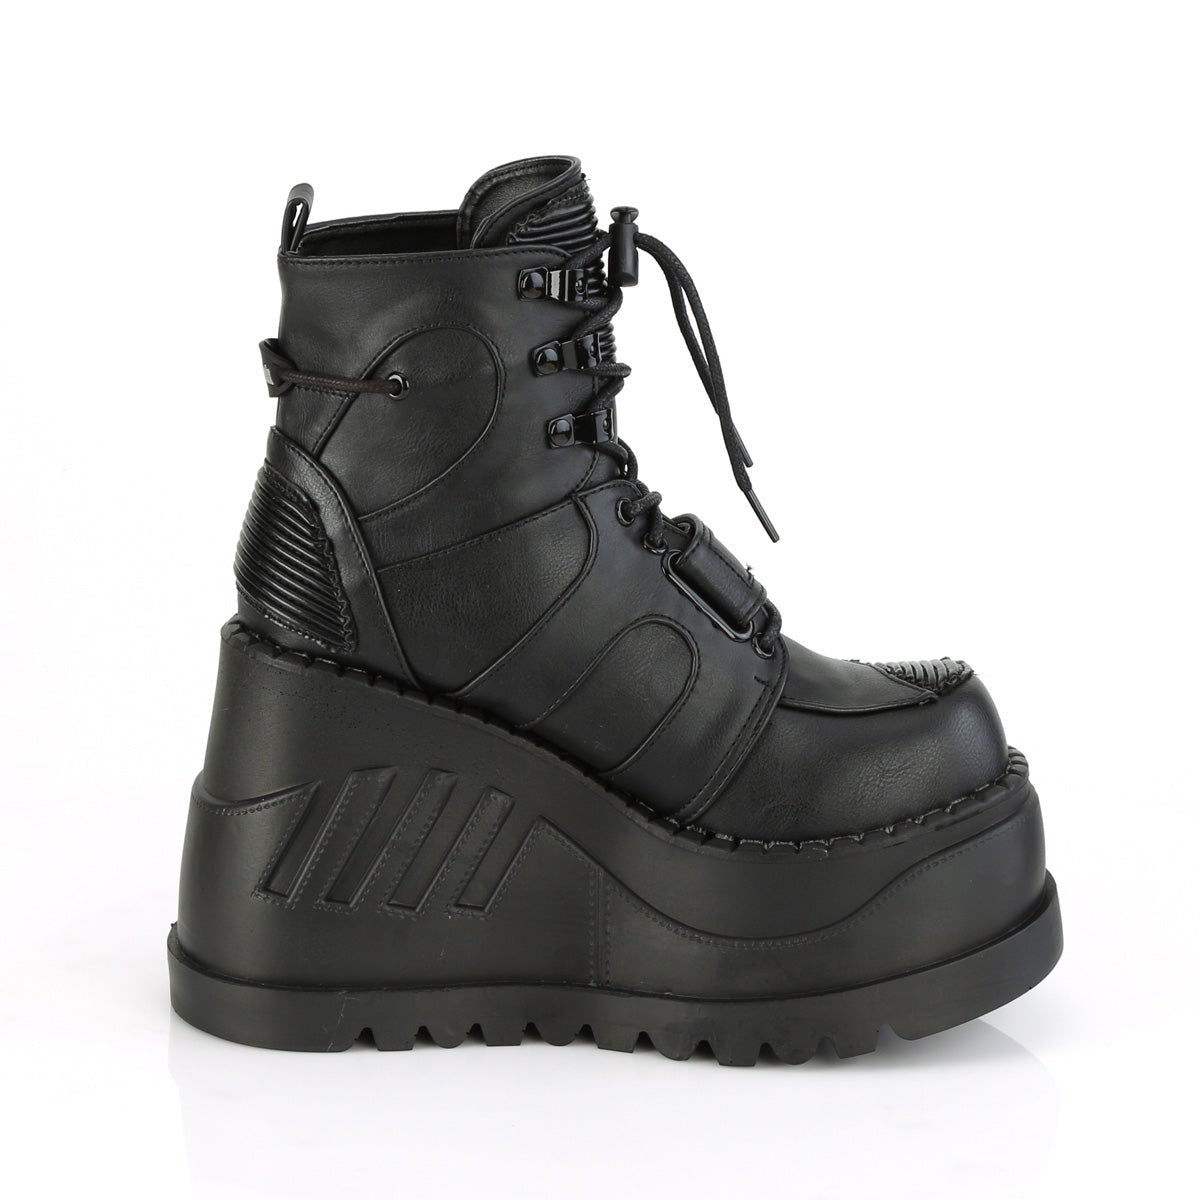 Too Fast | Demonia Stomp 13 | Black Vegan Leather Women's Ankle Boots